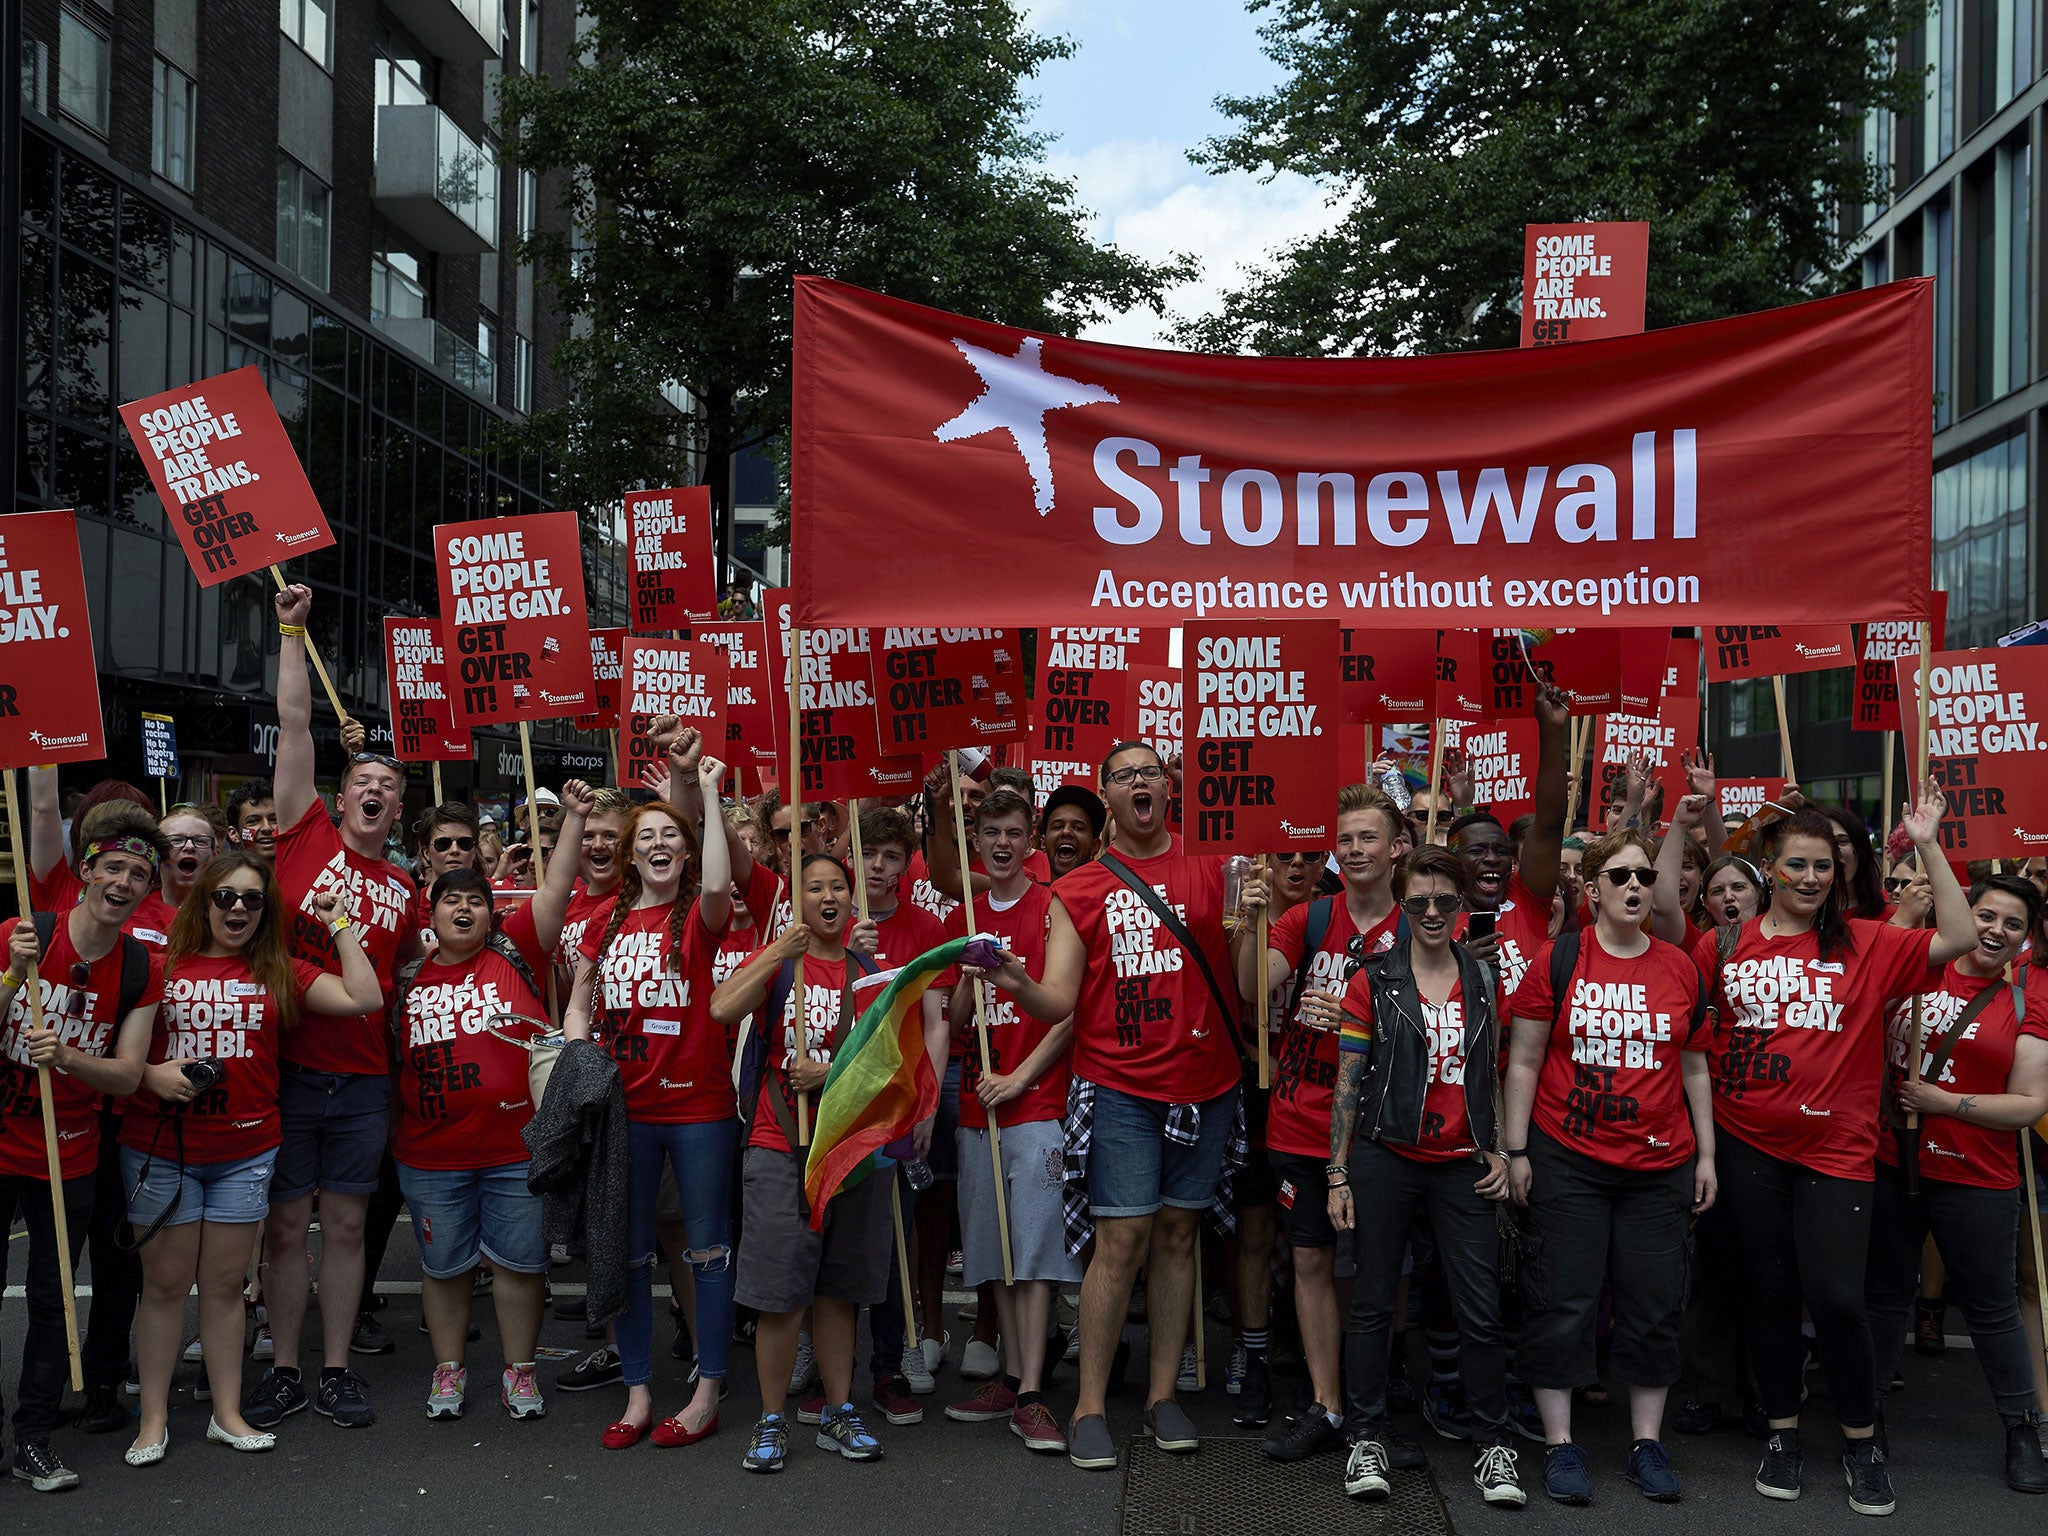 Members of 'Stonewall', who work for equality and justice for lesbians, gay men and bisexuals, take part in the annual Pride Parade in London